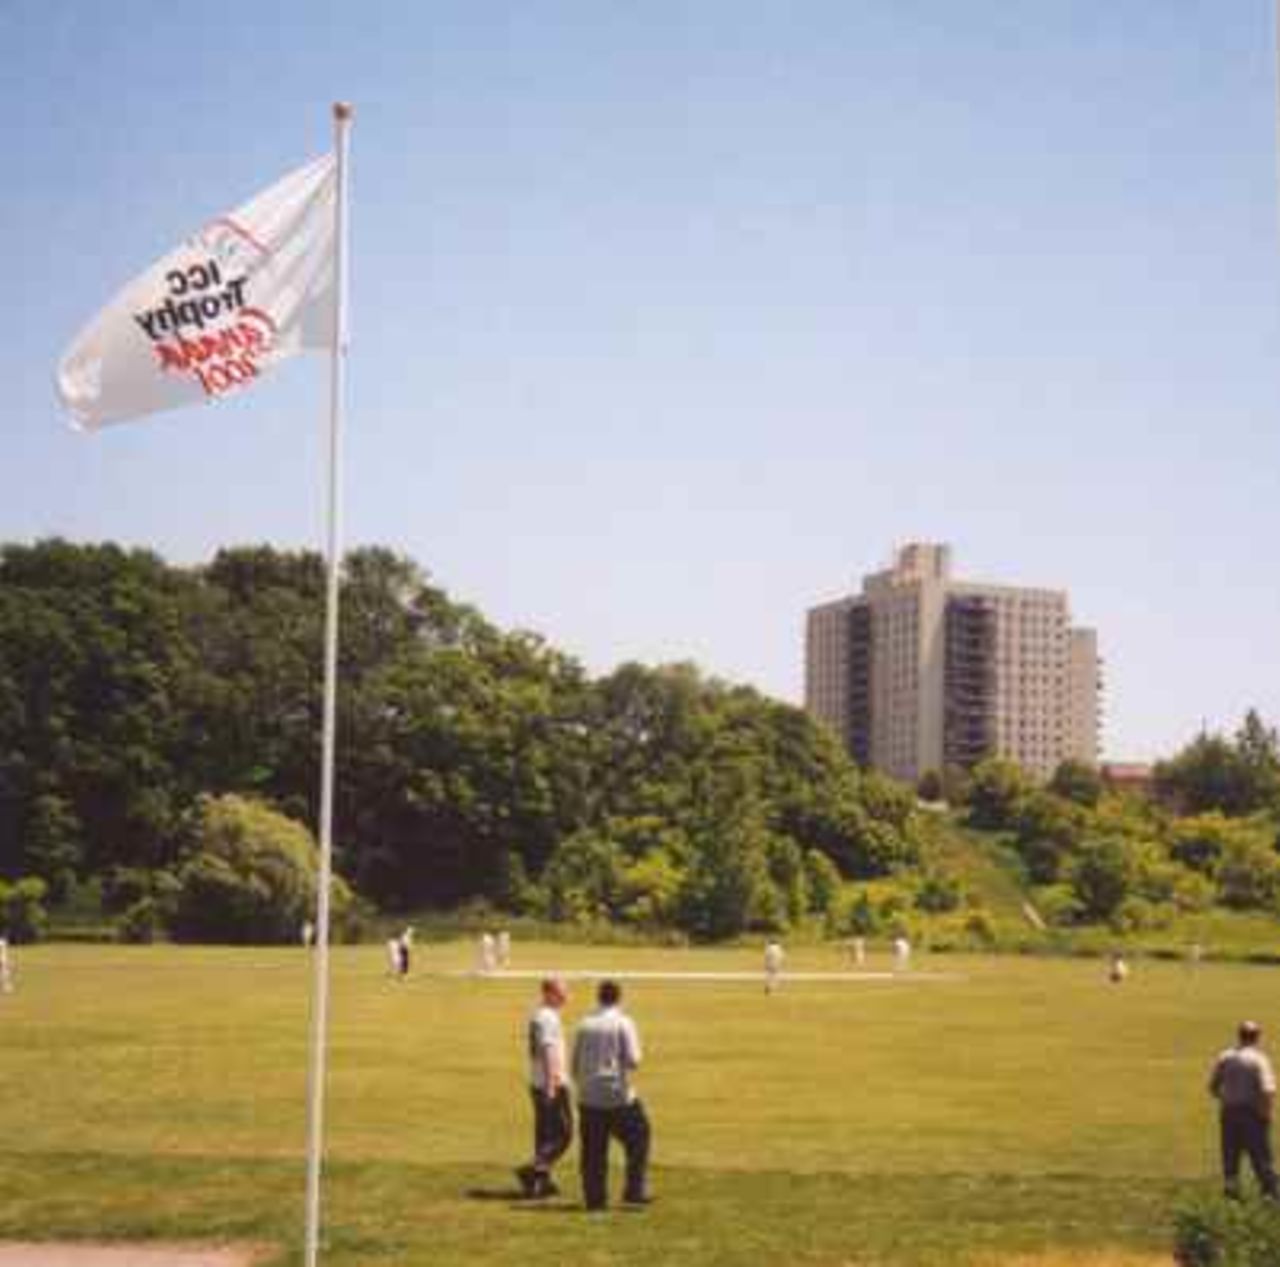 Eglinton Flats east ground, Toronto, venue for ICC Trophy 2001 matches. Warm-up game between Germany and Fiji in progress